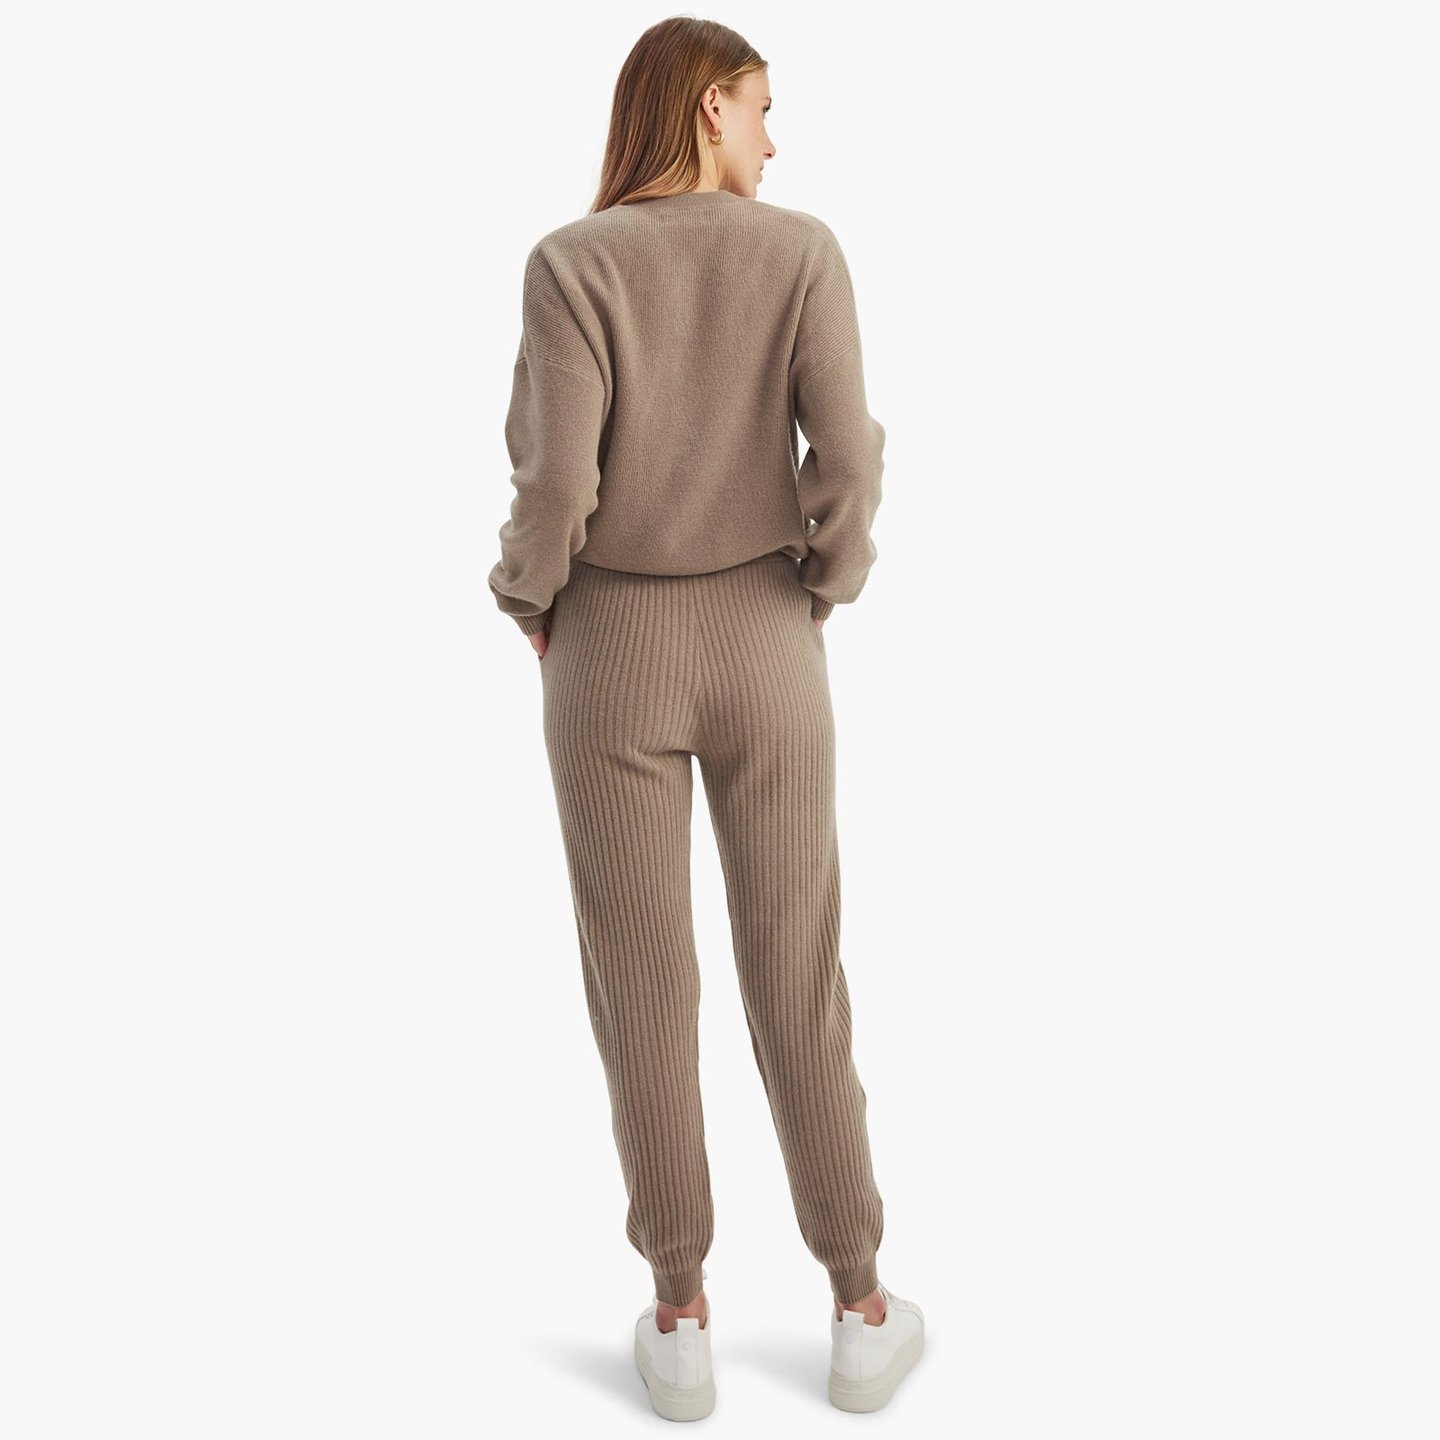 NWEB000795_Cashmere_Ribbed_Jogger_Taupe_010_774771c4-8fd2-43c1-9a04-5c01b3ec7130_1440x.jpg